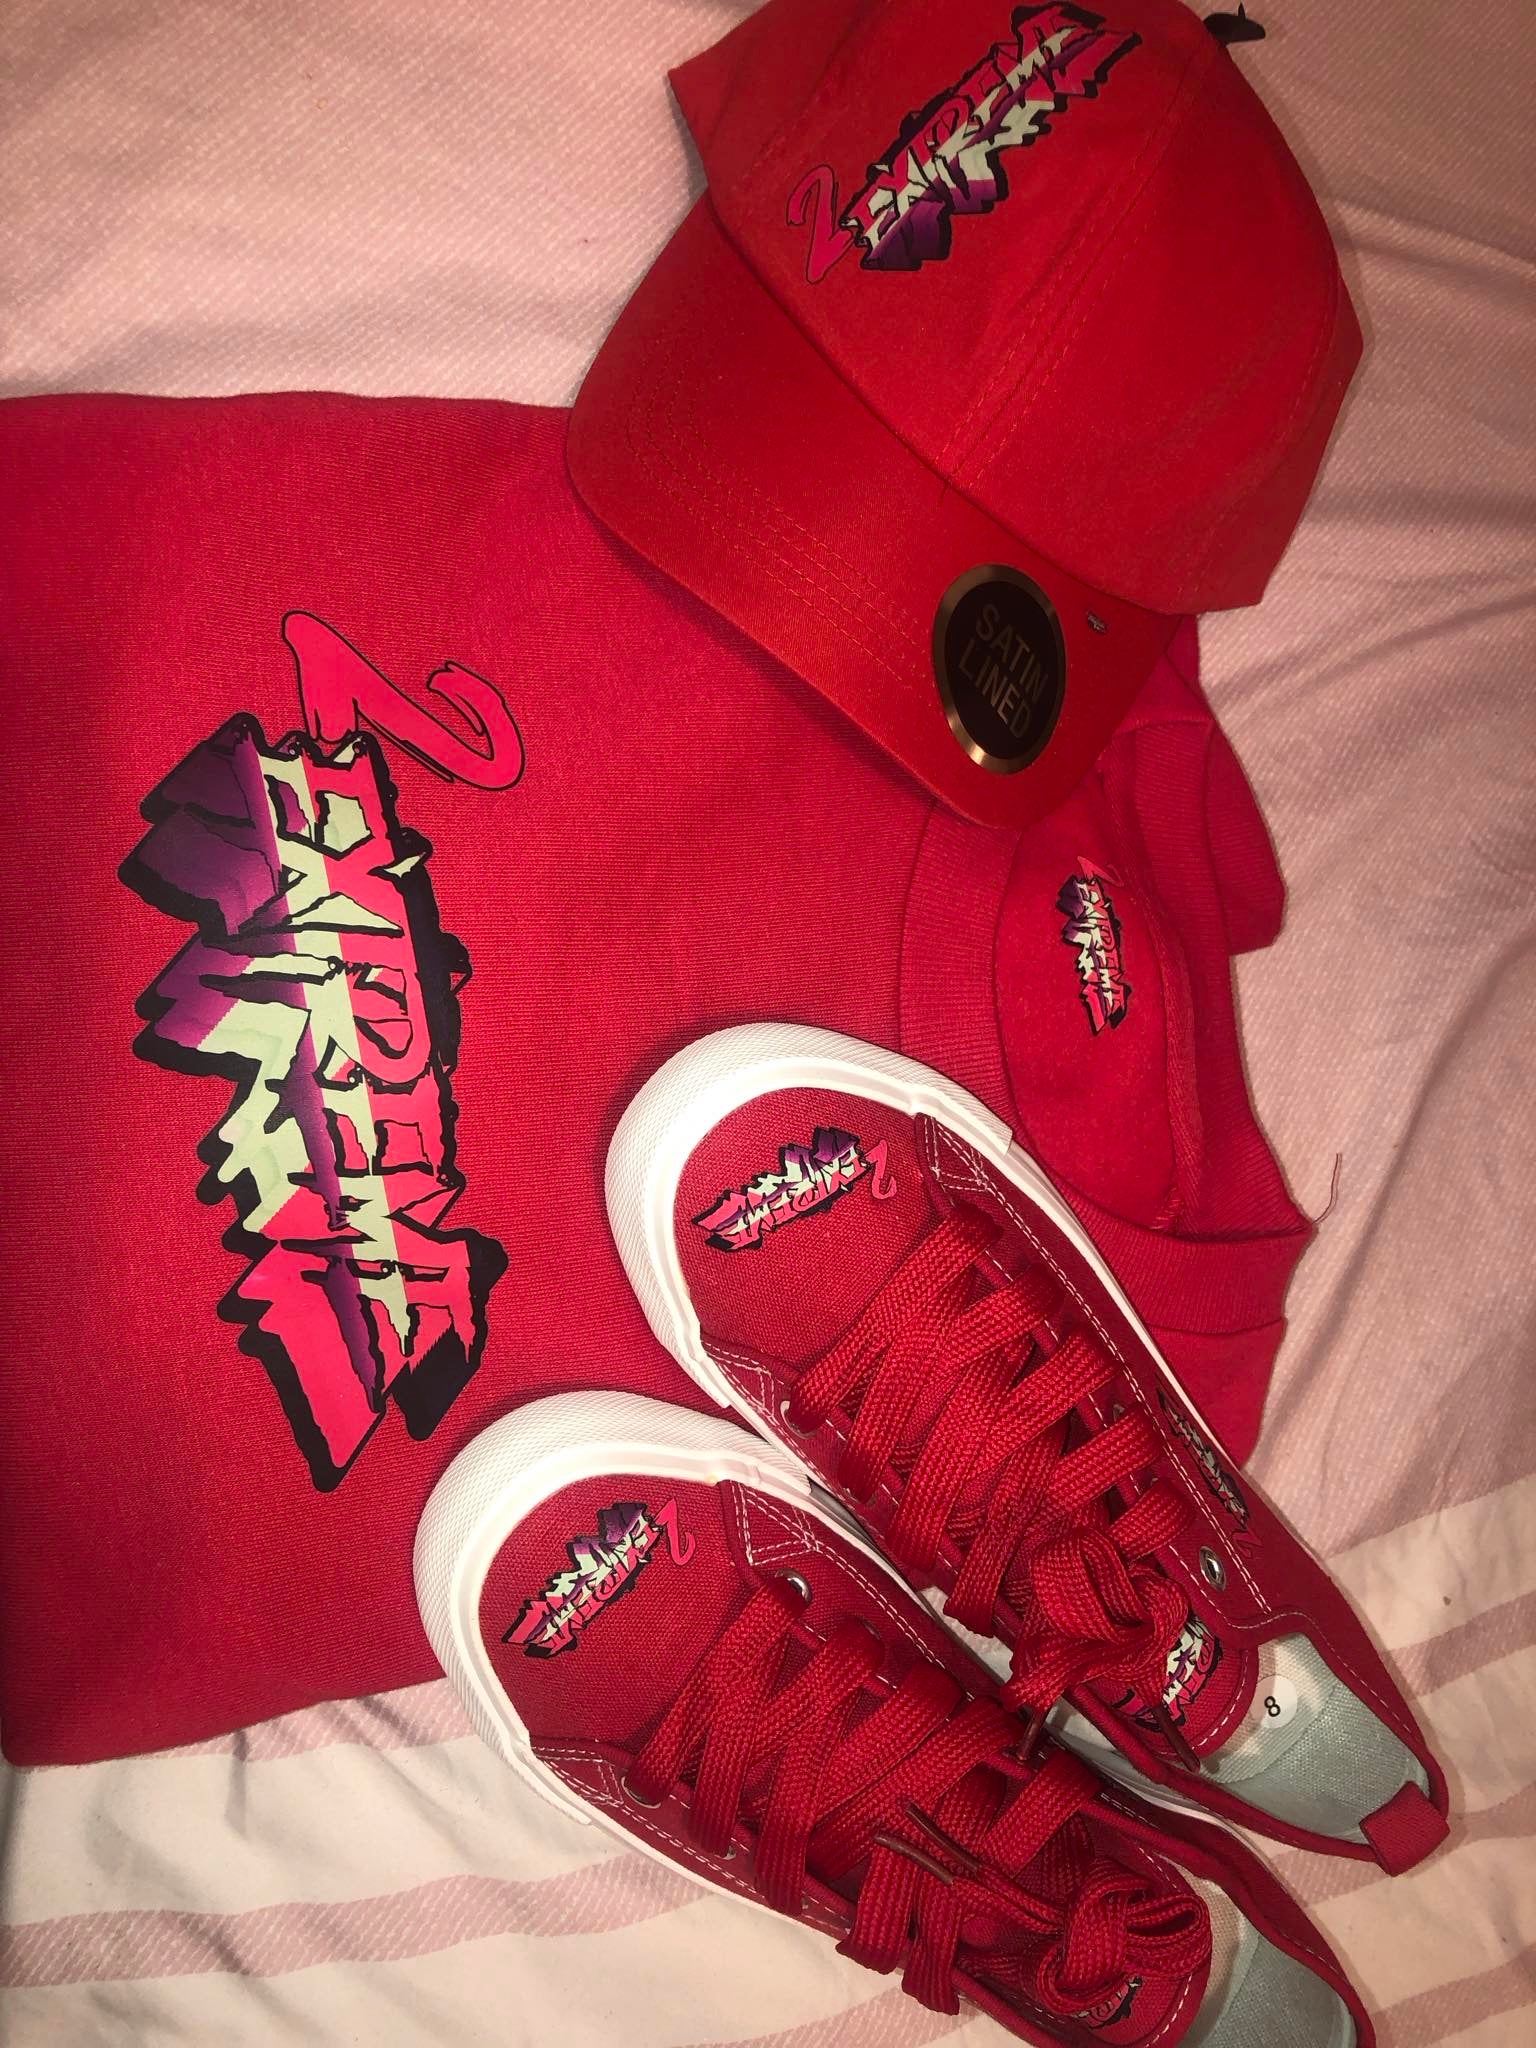 2EXTREME -Red Tee- Shirt Cap & Canvas Sneakers